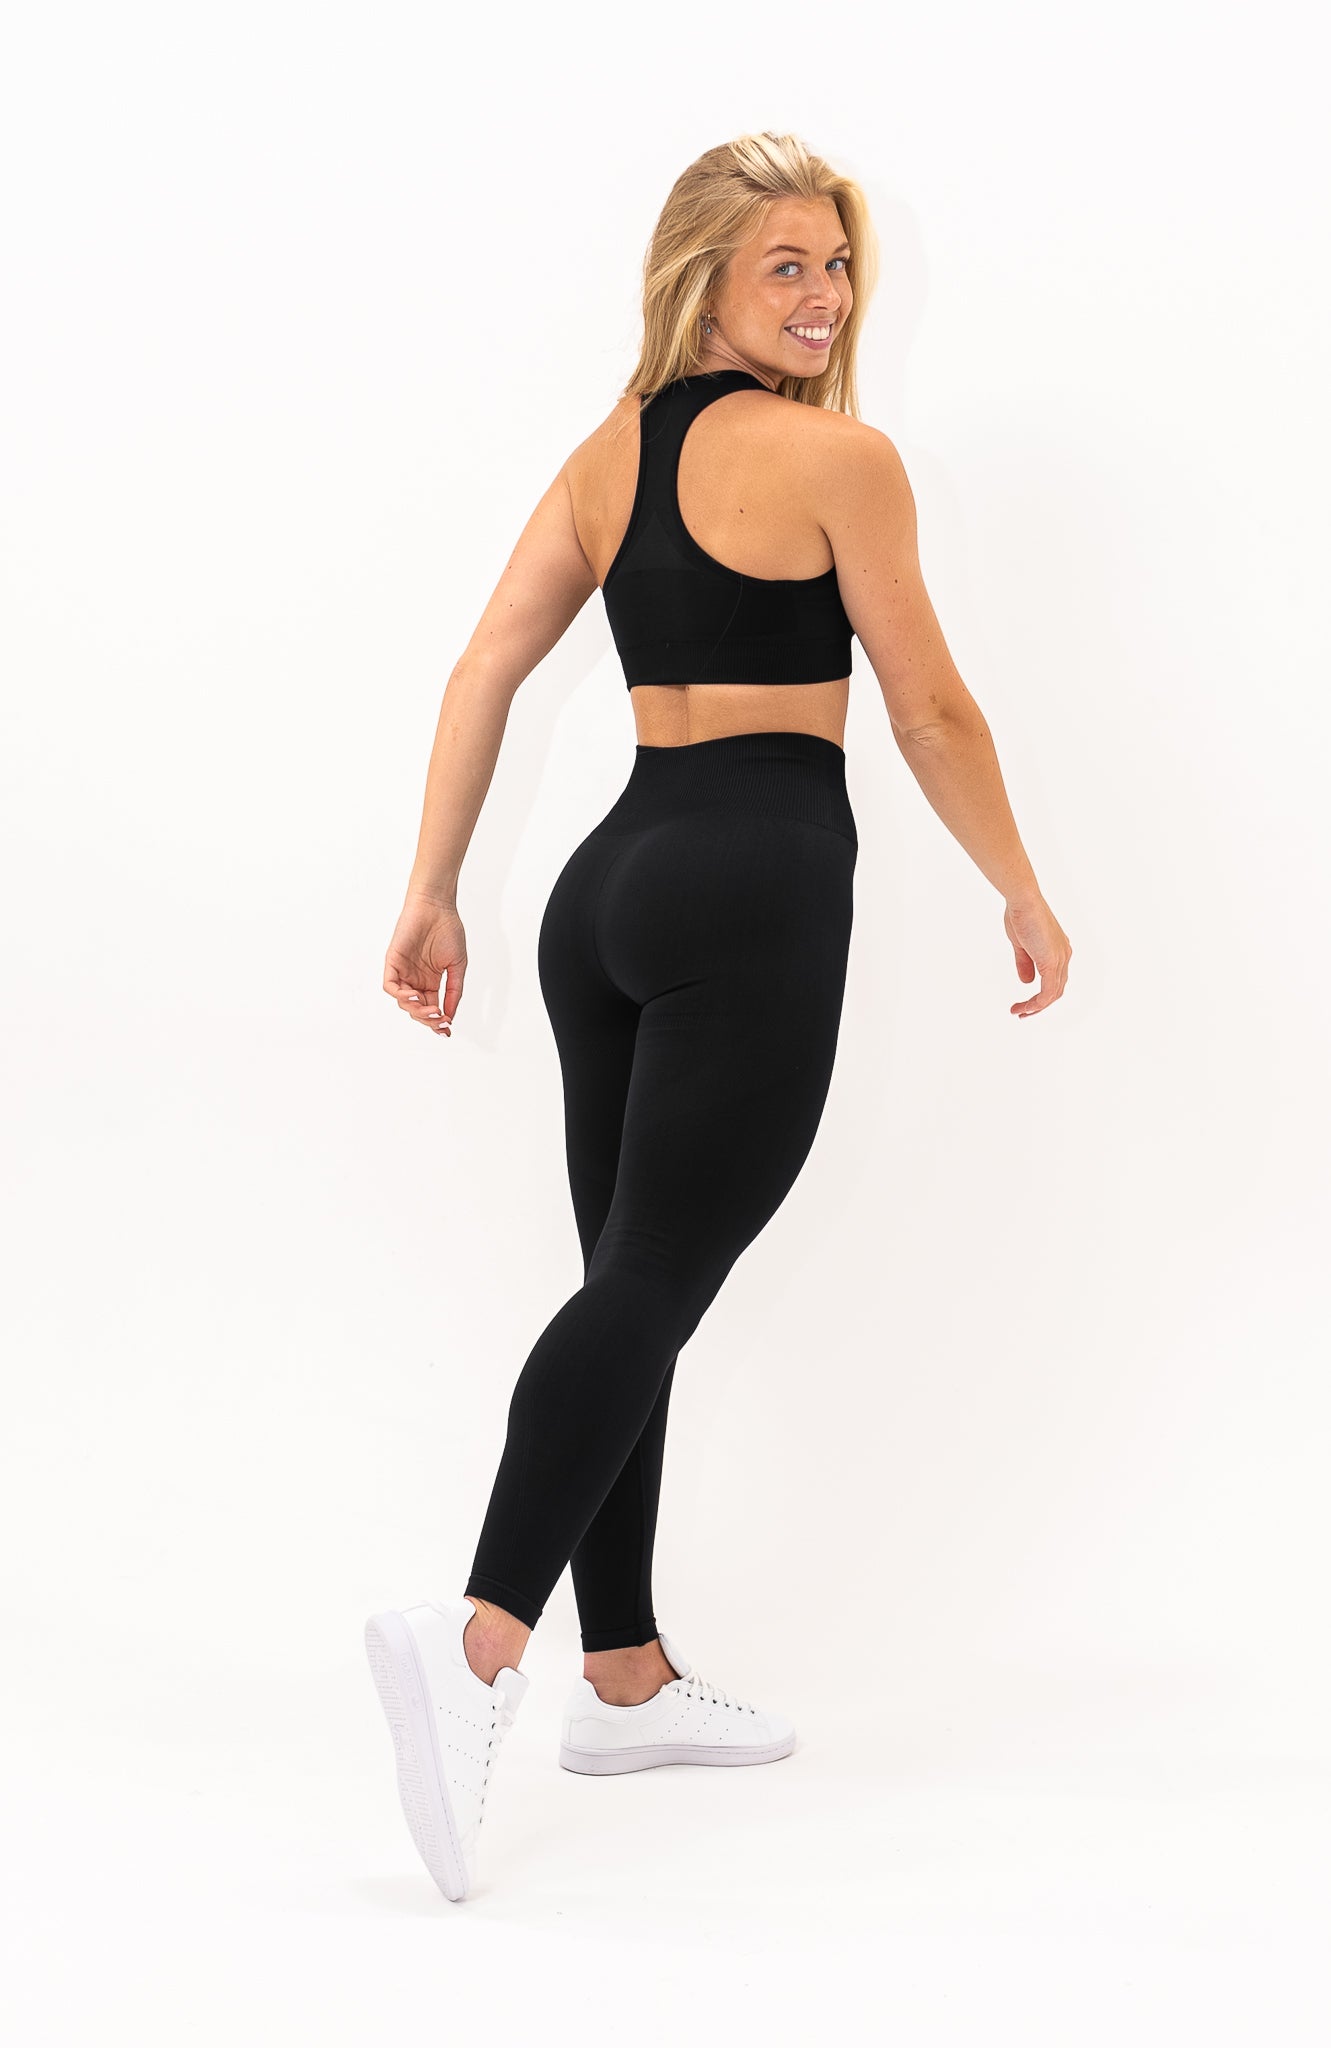 redbaysand Women's seamless Limitless bum shaping, high waisted leggings in black– Squat proof sports tights for Gym workouts training, Running, yoga, bodybuilding and bikini fitness.